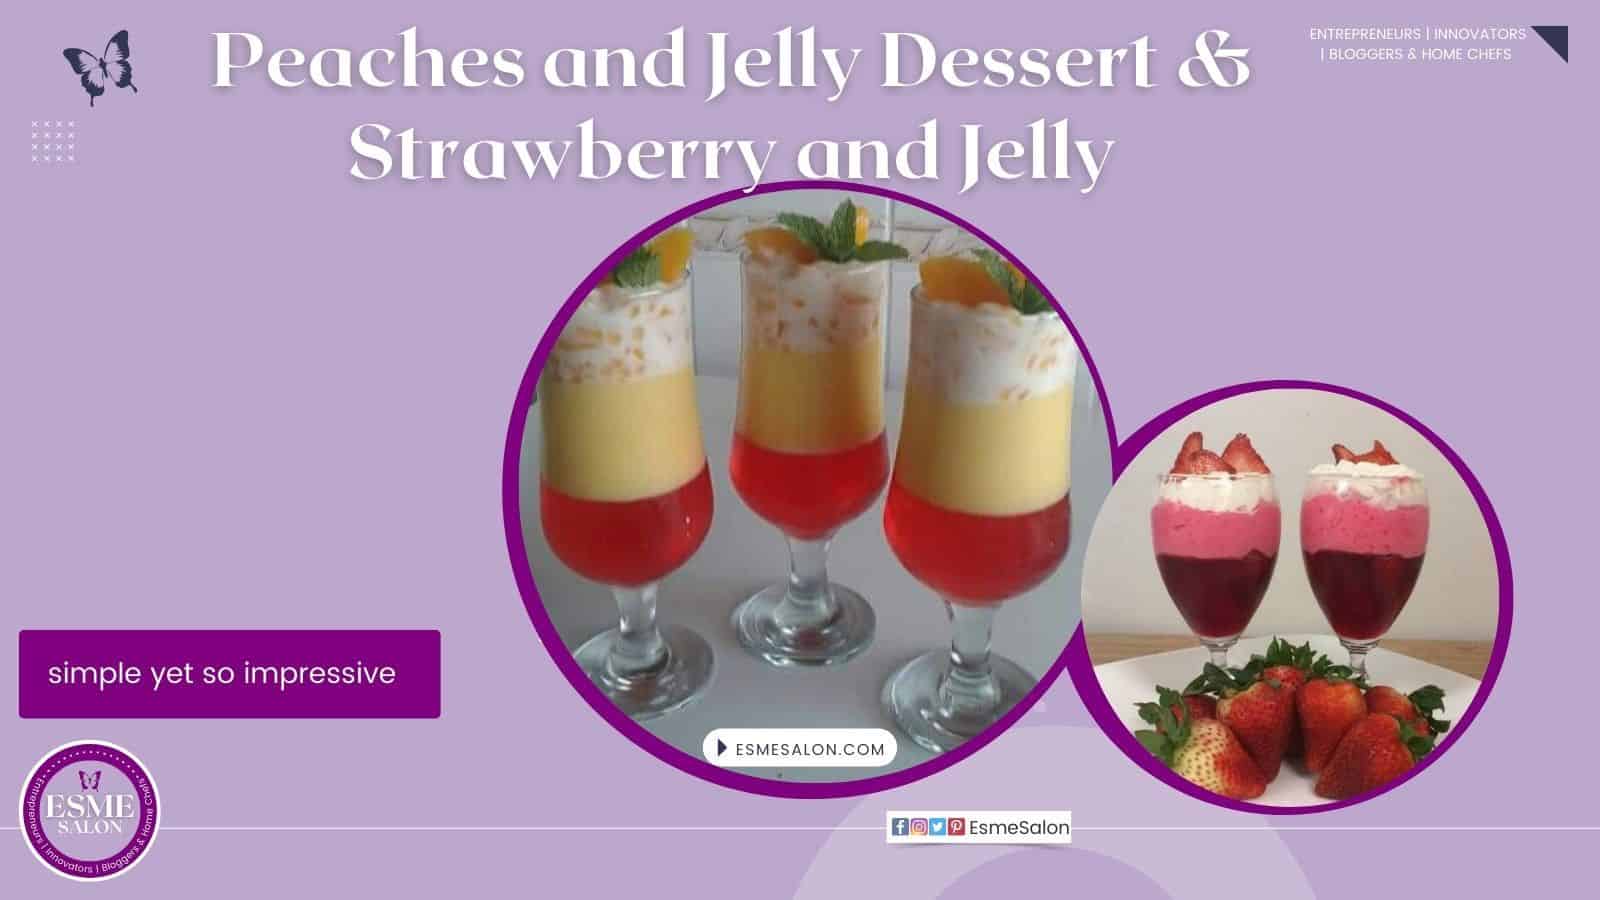 an image of two long glasses filled with Strawberry version of Peaches Jelly Dessert